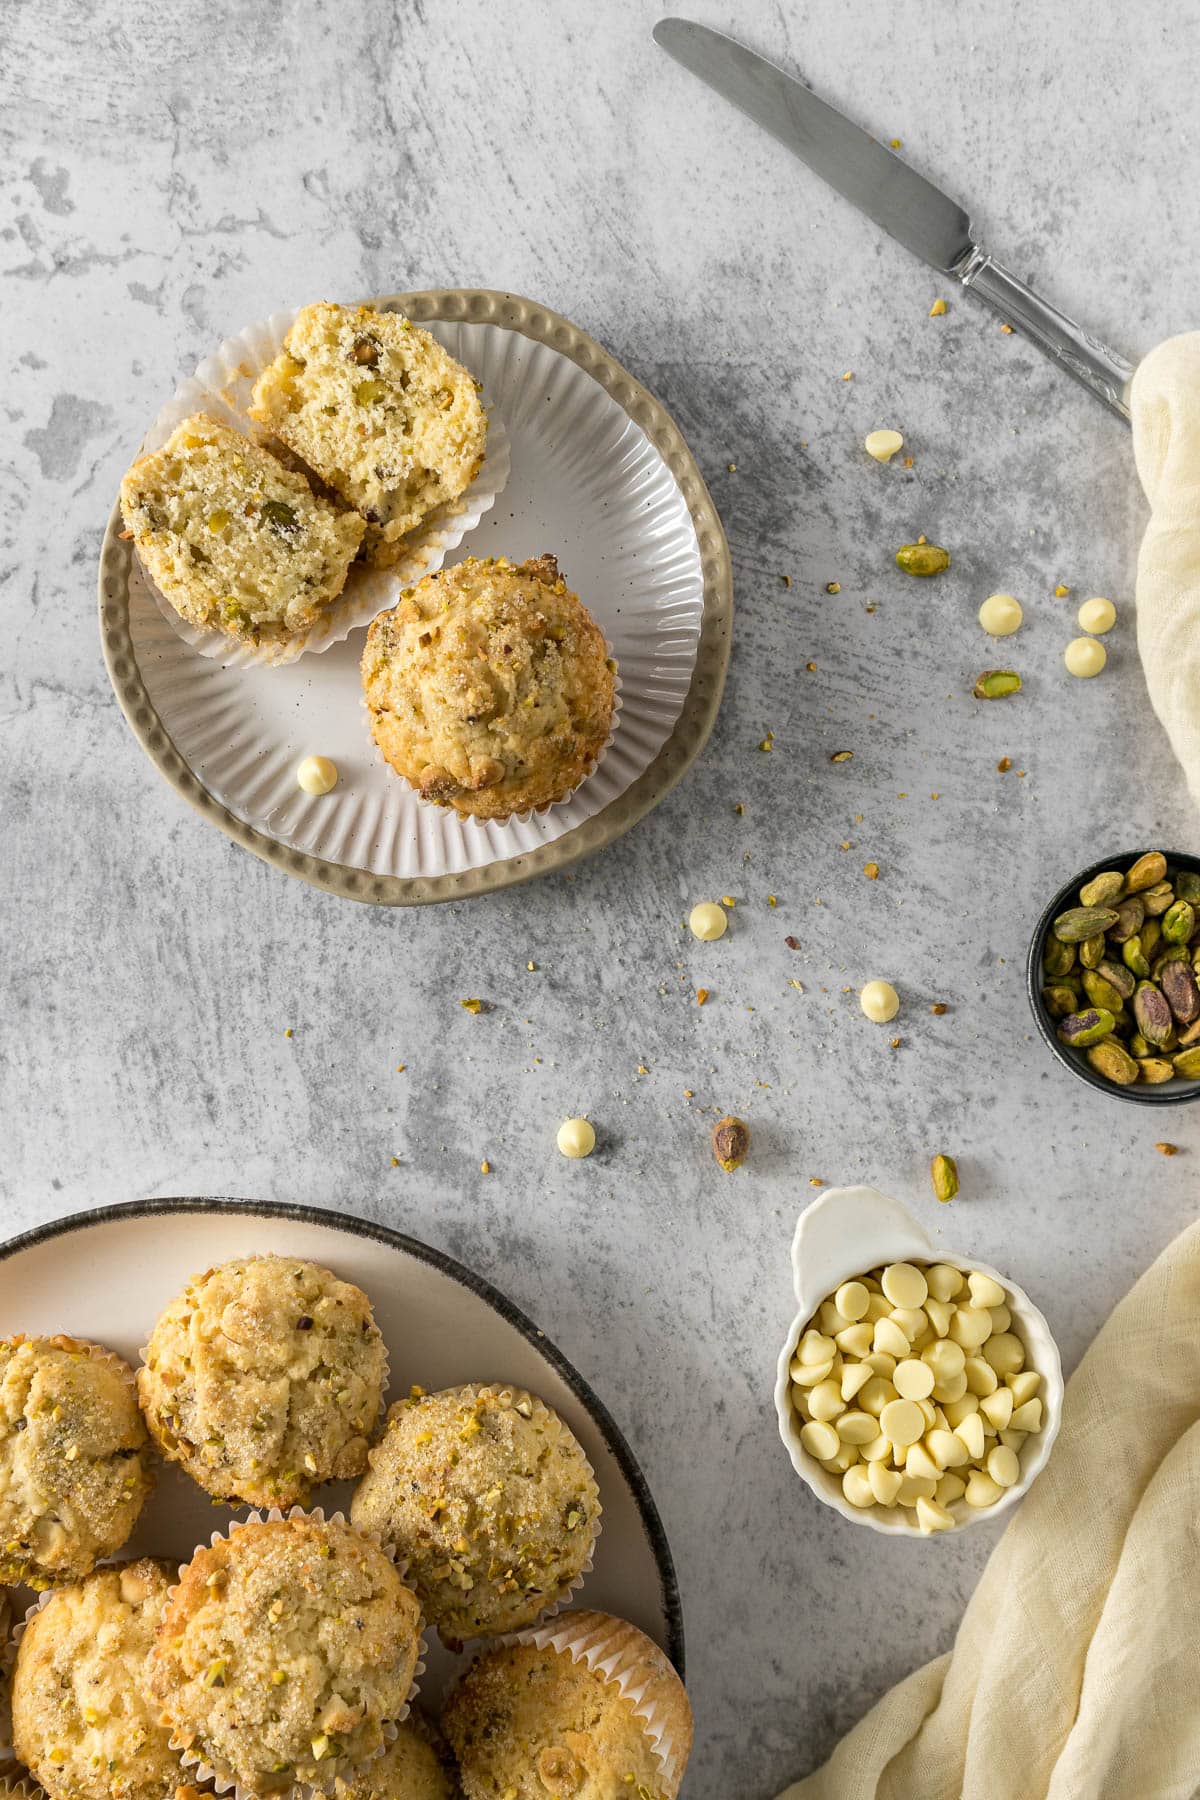 Pistachio muffins on a plate.